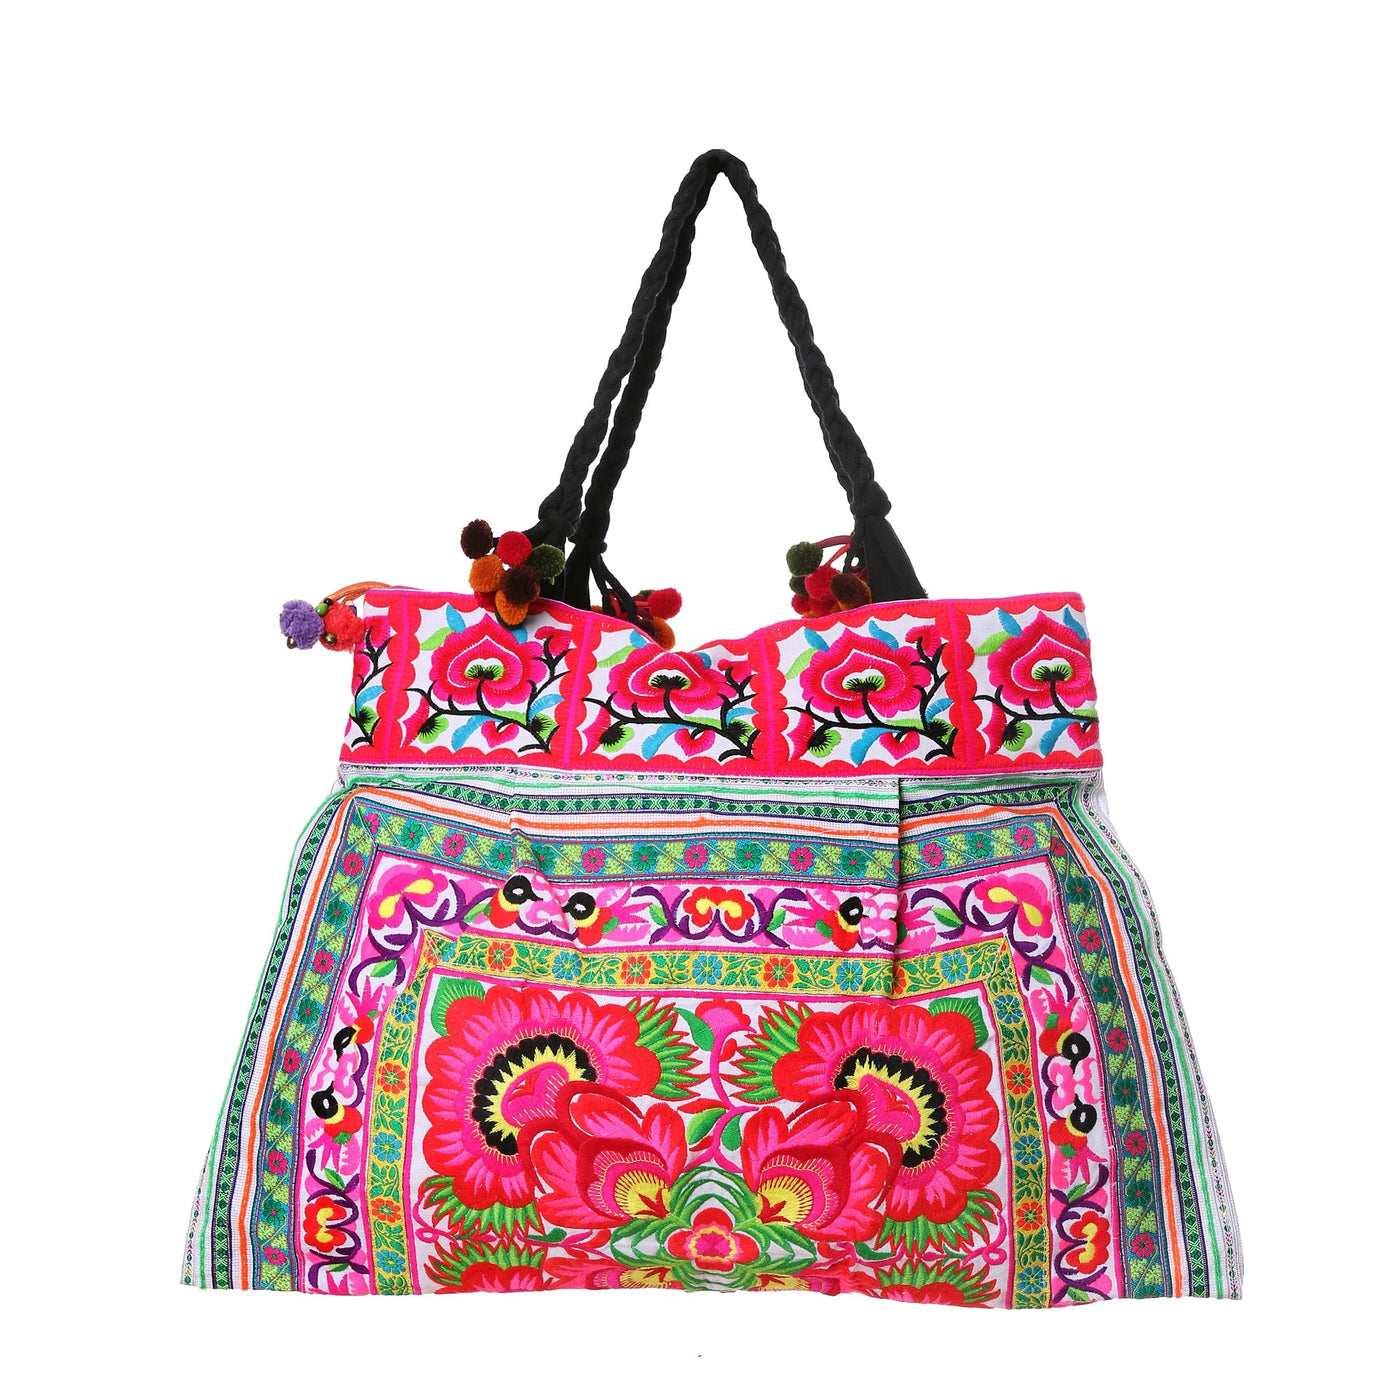 Colorful Embroidered Tote Bag - Boho Chic Large Handbag - Style CEPTB02 Embroidered Bag White / Flowers 